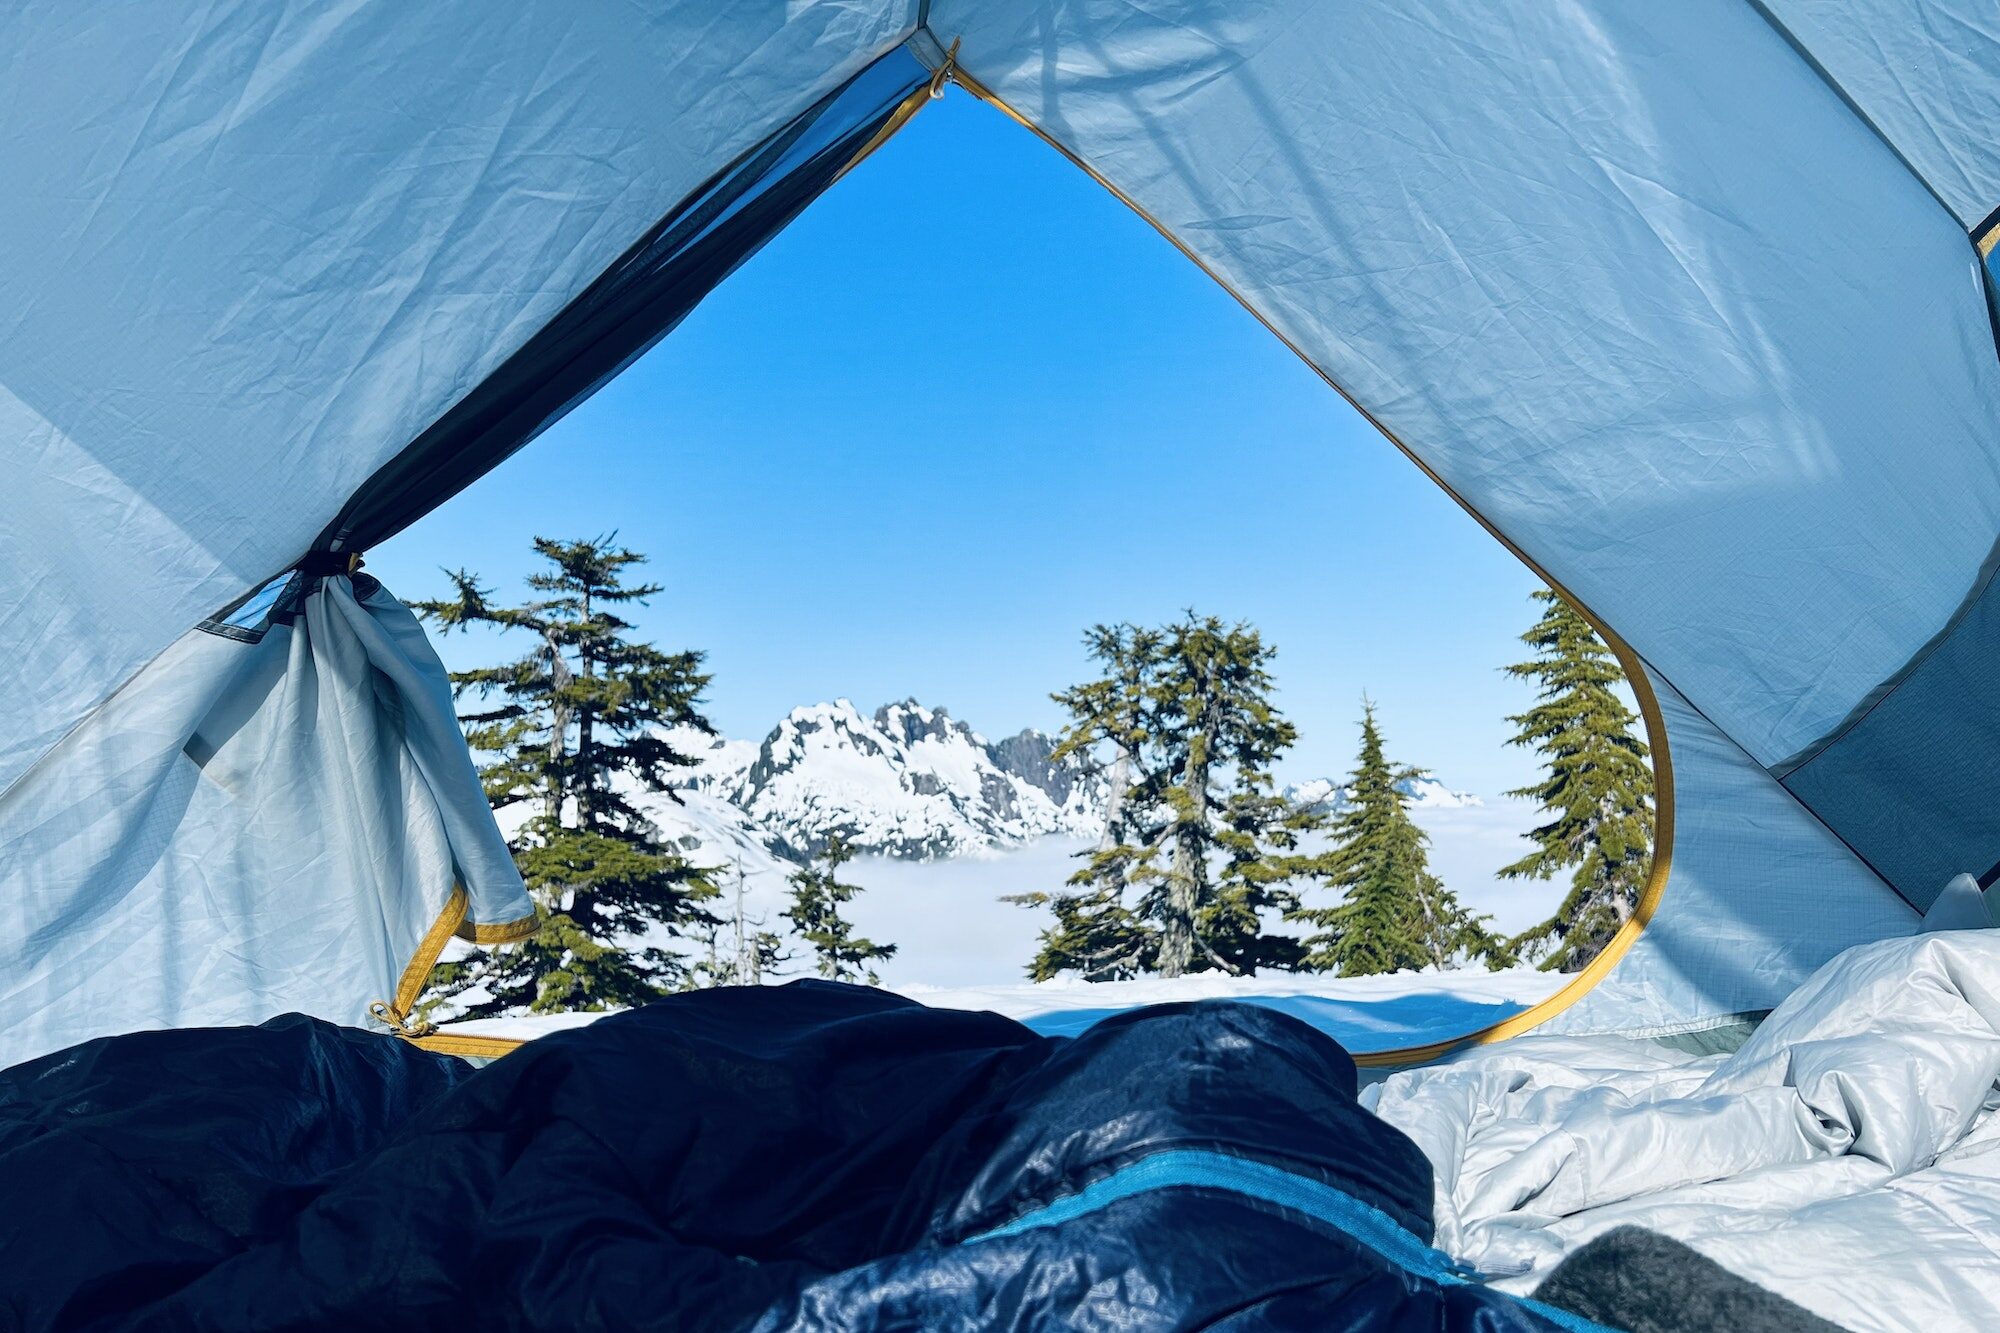 Camping in the snowy mountains above the cloud inversion